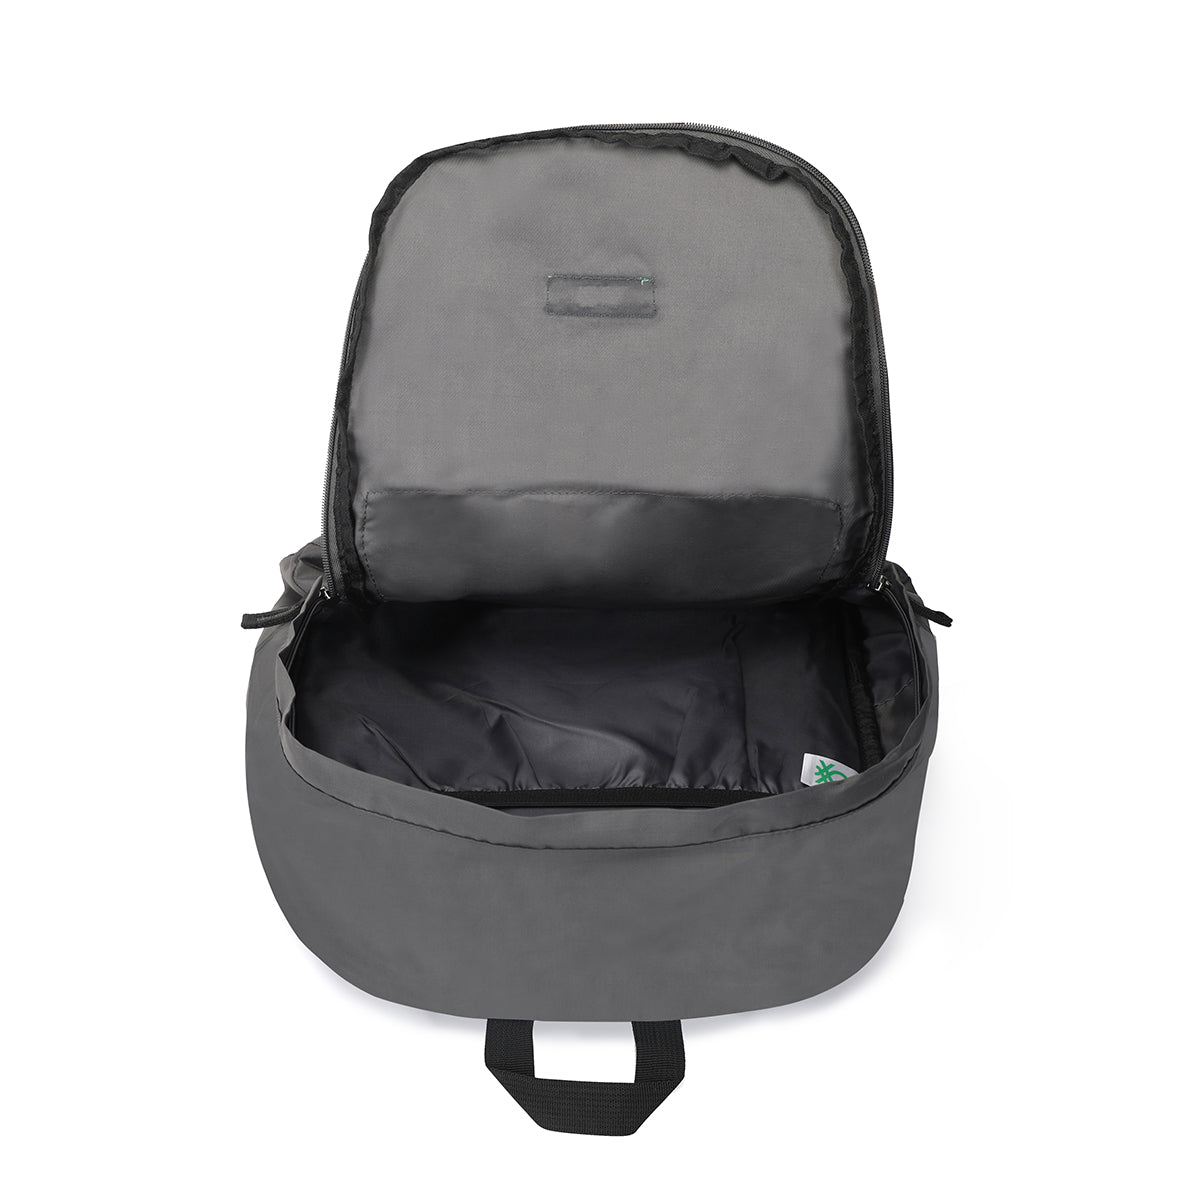 United Colors of Benetton Xenon Non Laptop Backpack